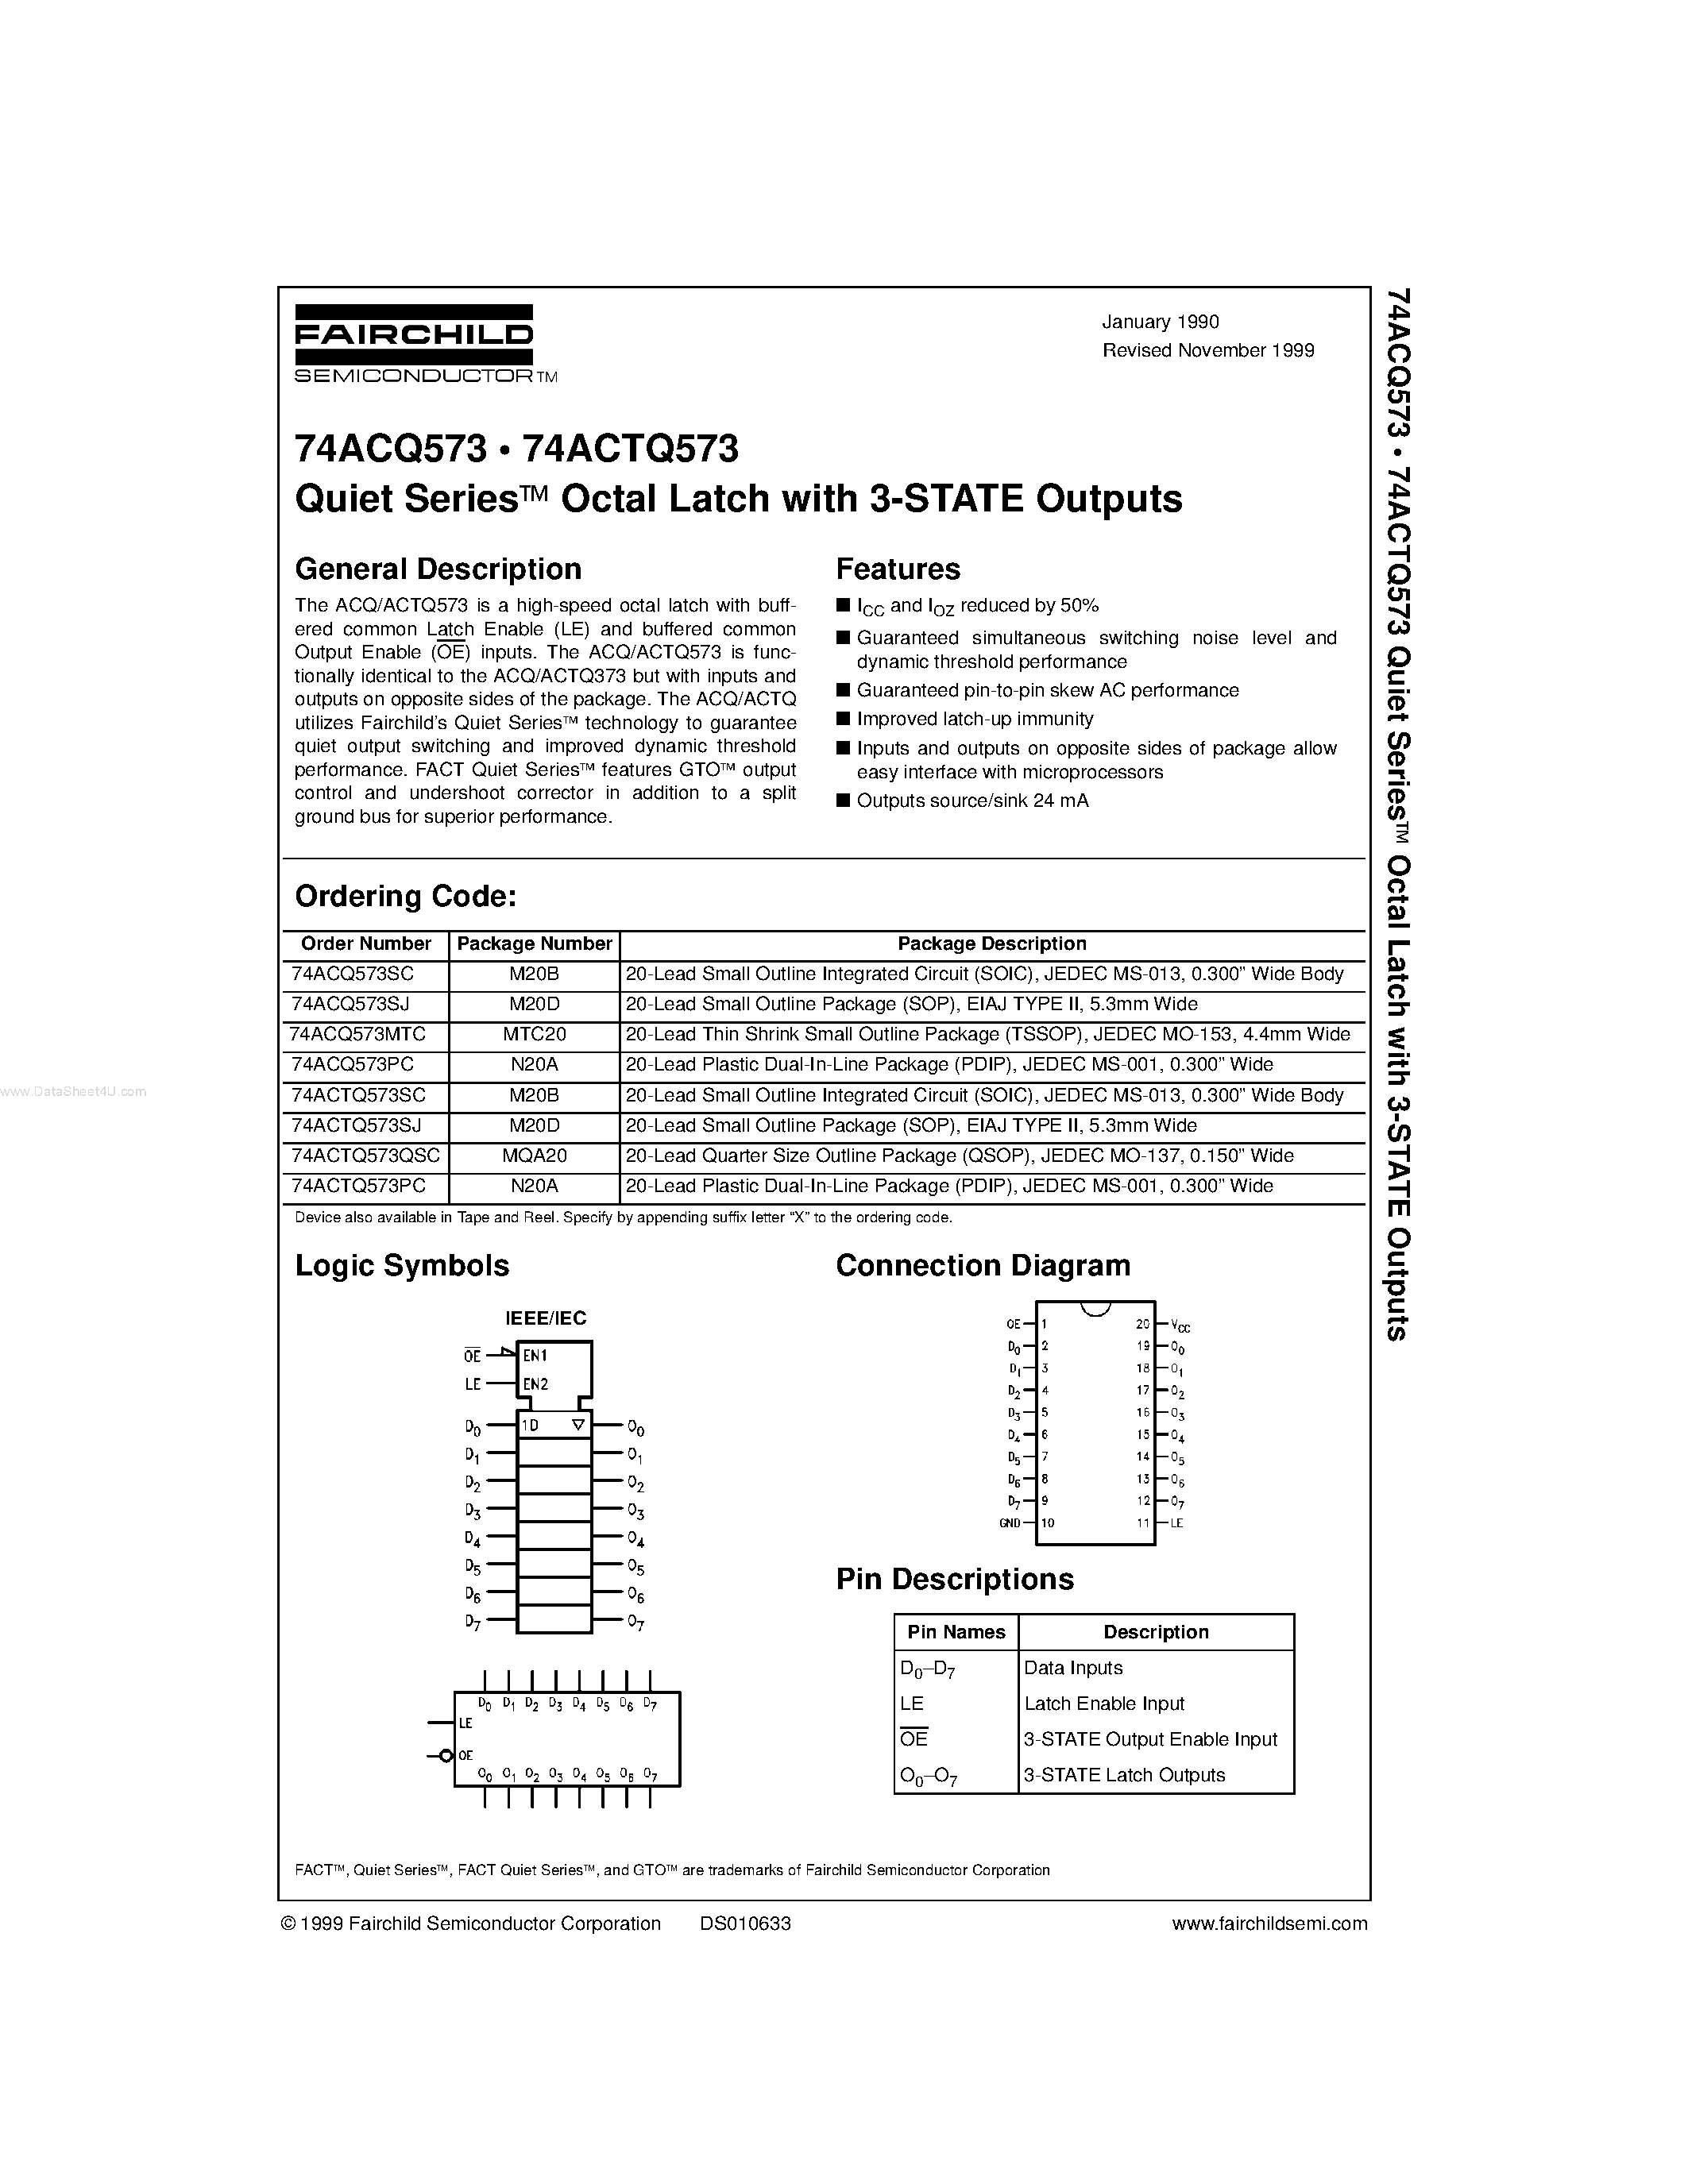 Datasheet 74ACQ573SJ - Quiet Series Octal Latch with 3-STATE Outputs page 1